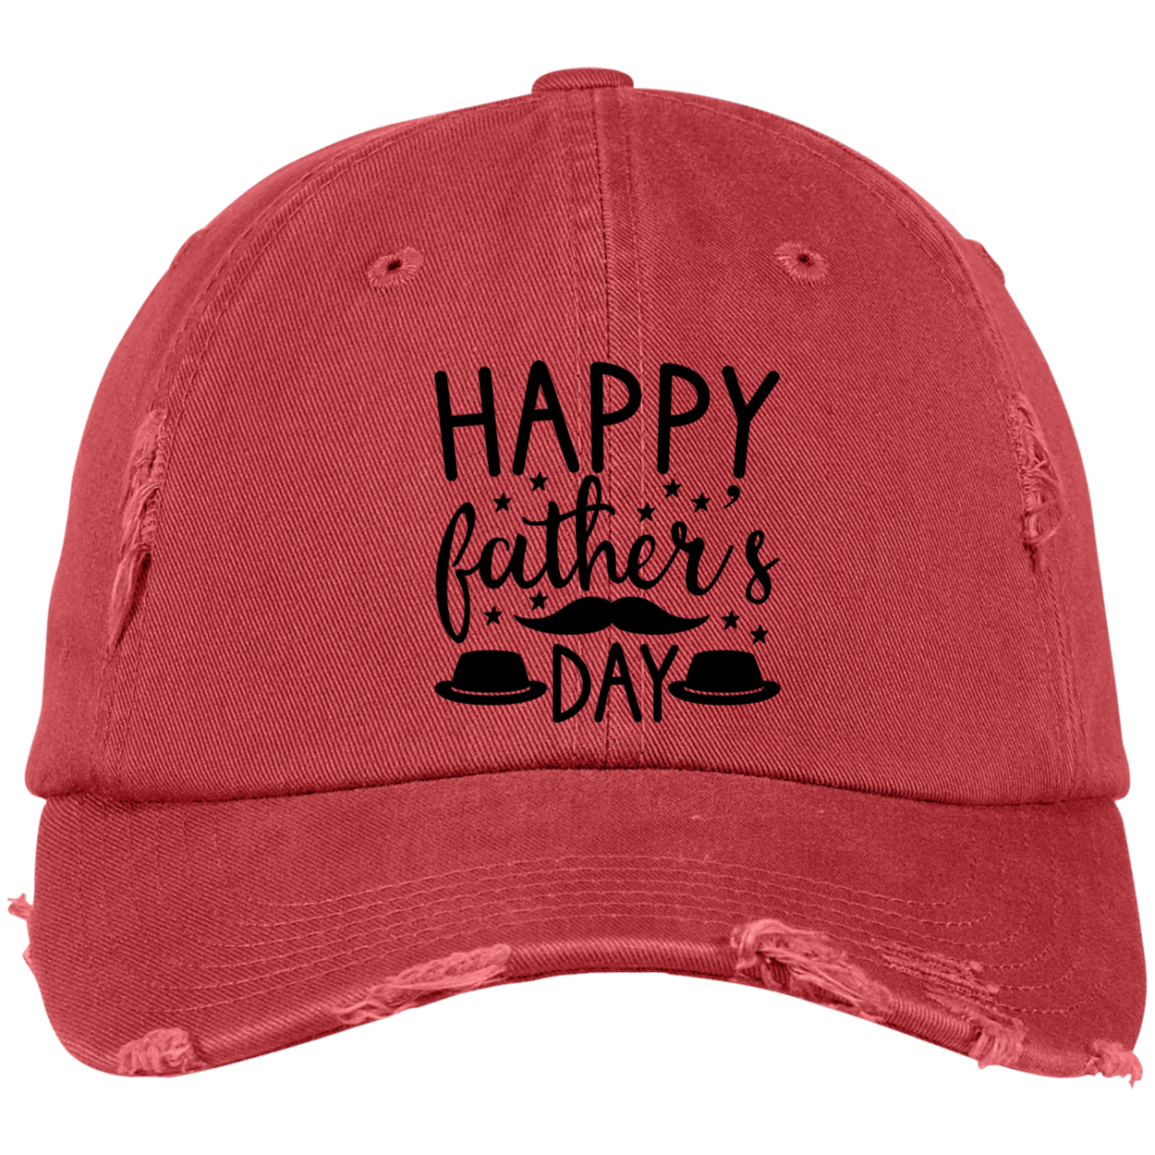 Happy Fathers Day Embroidered Distressed Dad Cap